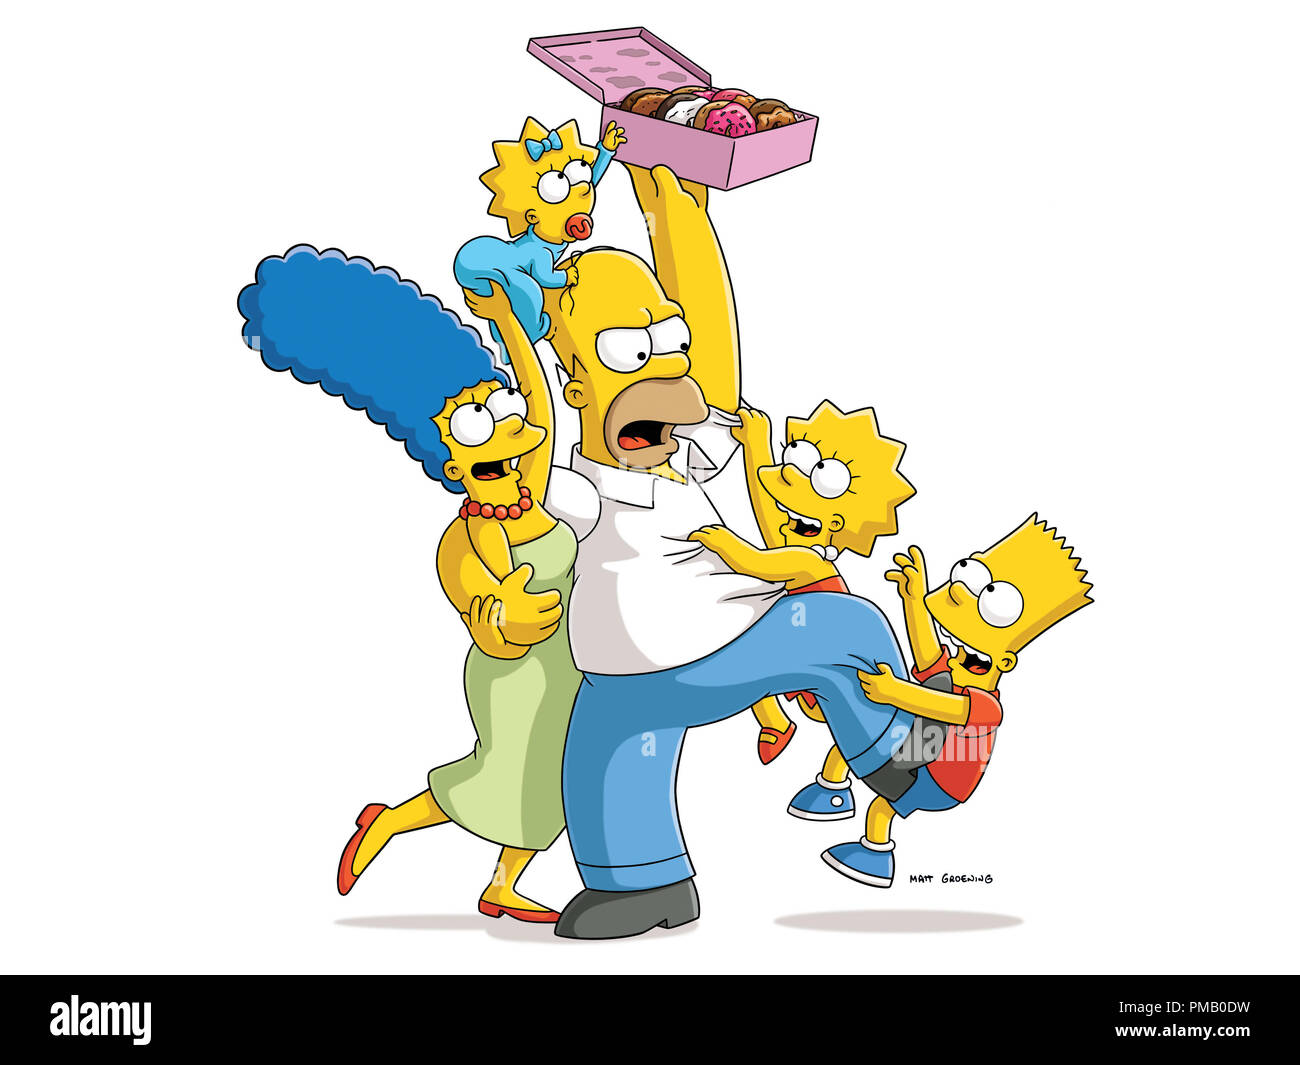 Detail Image Of The Simpsons Family Nomer 28